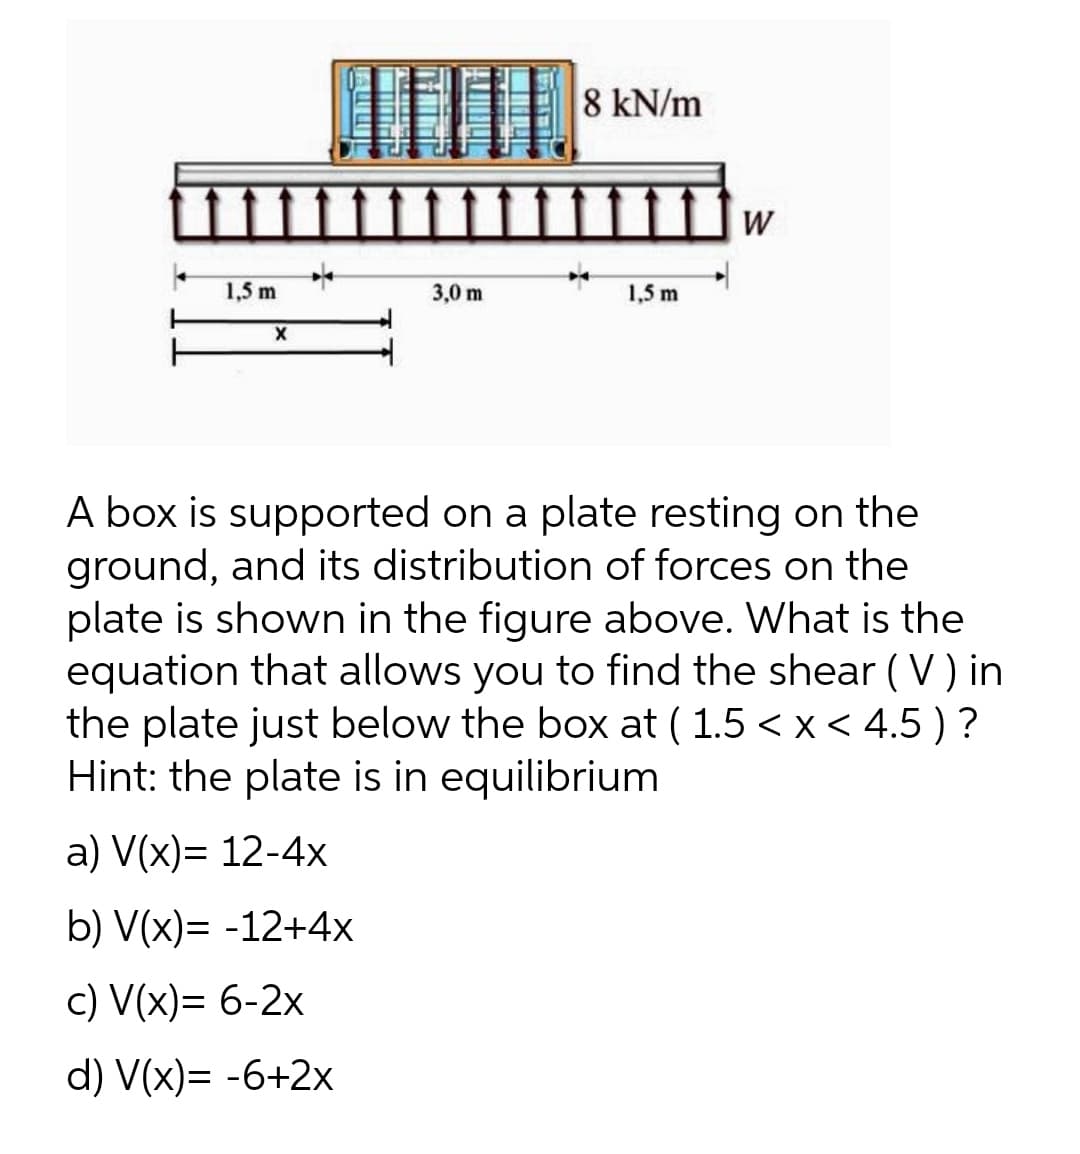 8 kN/m
3,0 m
1,5 m
X
A box is supported on a plate resting on the
ground, and its distribution of forces on the
plate is shown in the figure above. What is the
equation that allows you to find the shear (V) in
the plate just below the box at ( 1.5 < x < 4.5) ?
Hint: the plate is in equilibrium
a) V(x)= 12-4x
b) V(x)= -12+4x
c) V(x)= 6-2x
d) V(x)= -6+2x
1,5 m
W